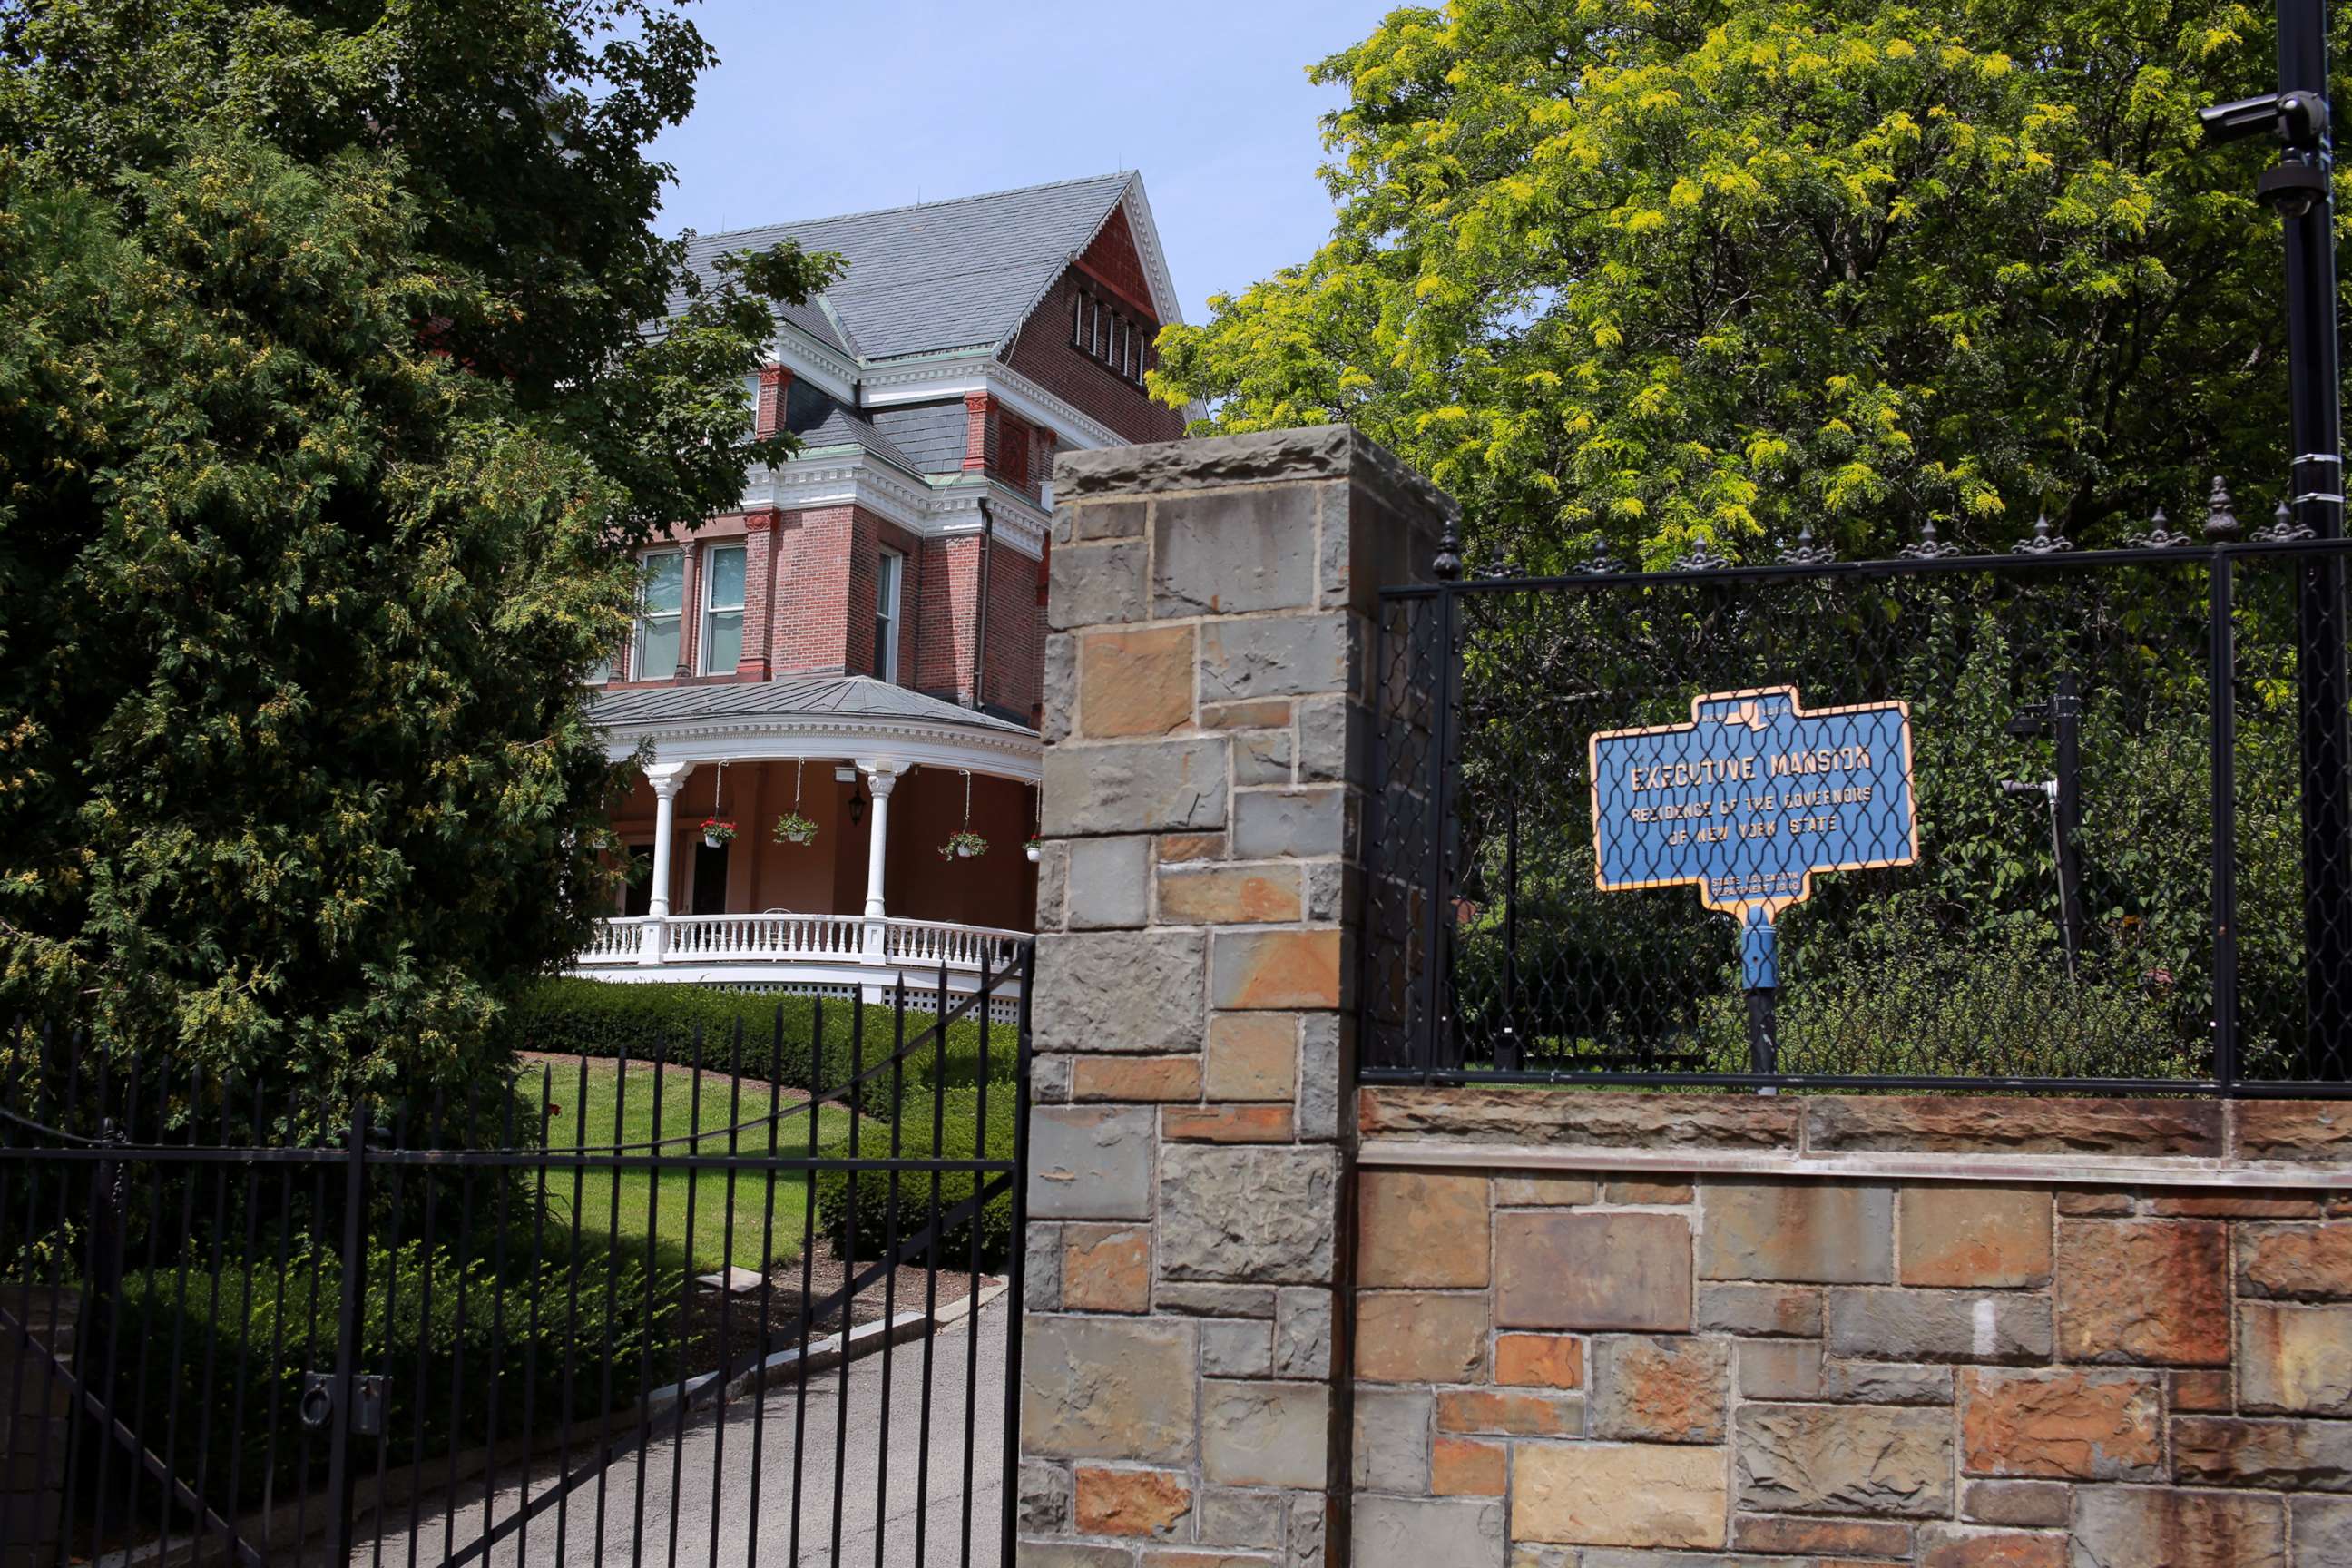 PHOTO: The New York State governor's residence, is seen after an independent inquiry showed that New York Governor Andrew Cuomo sexually harassed multiple women and violated federal and state laws, in Albany, New York, Aug. 3, 2021.